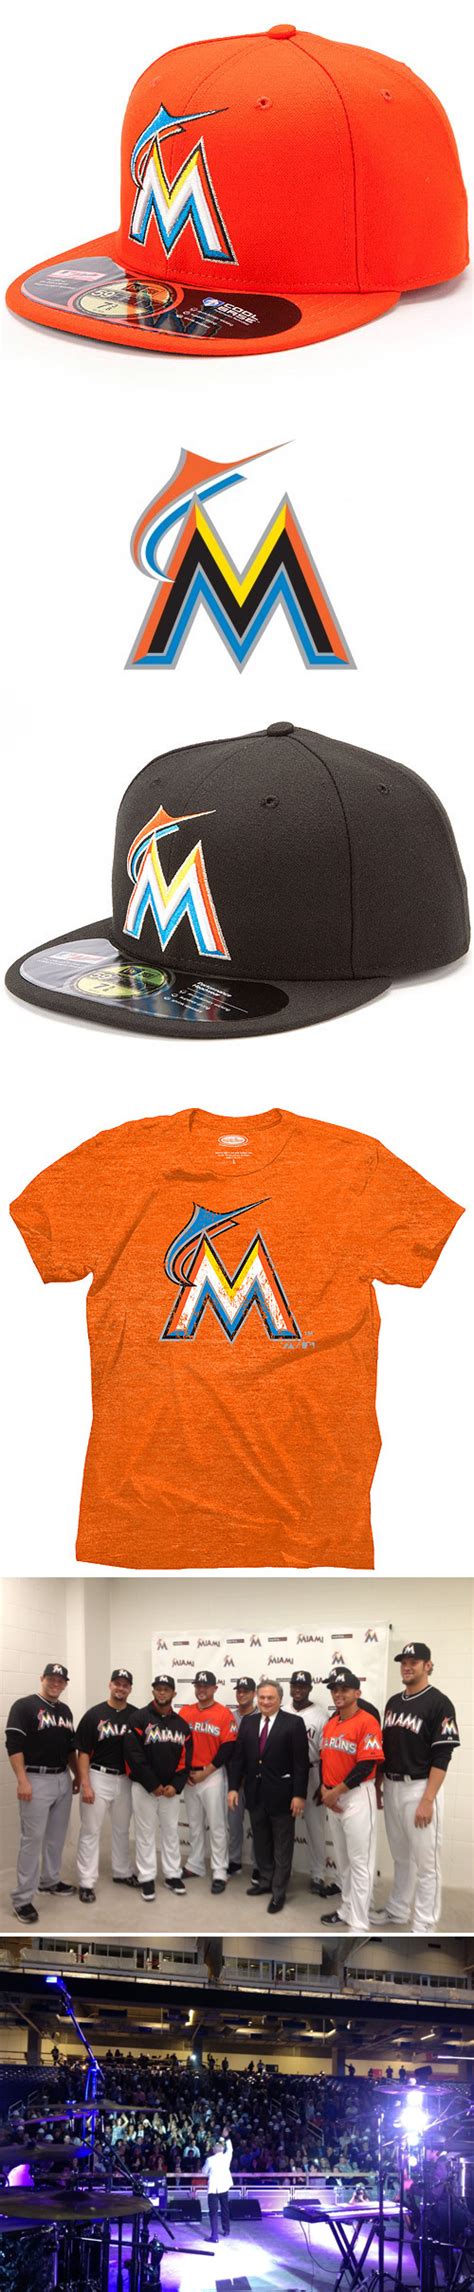 The Miami Marlins Officially Unveiled Logo And Uniforms Kicks Addict L The Official Sneaker